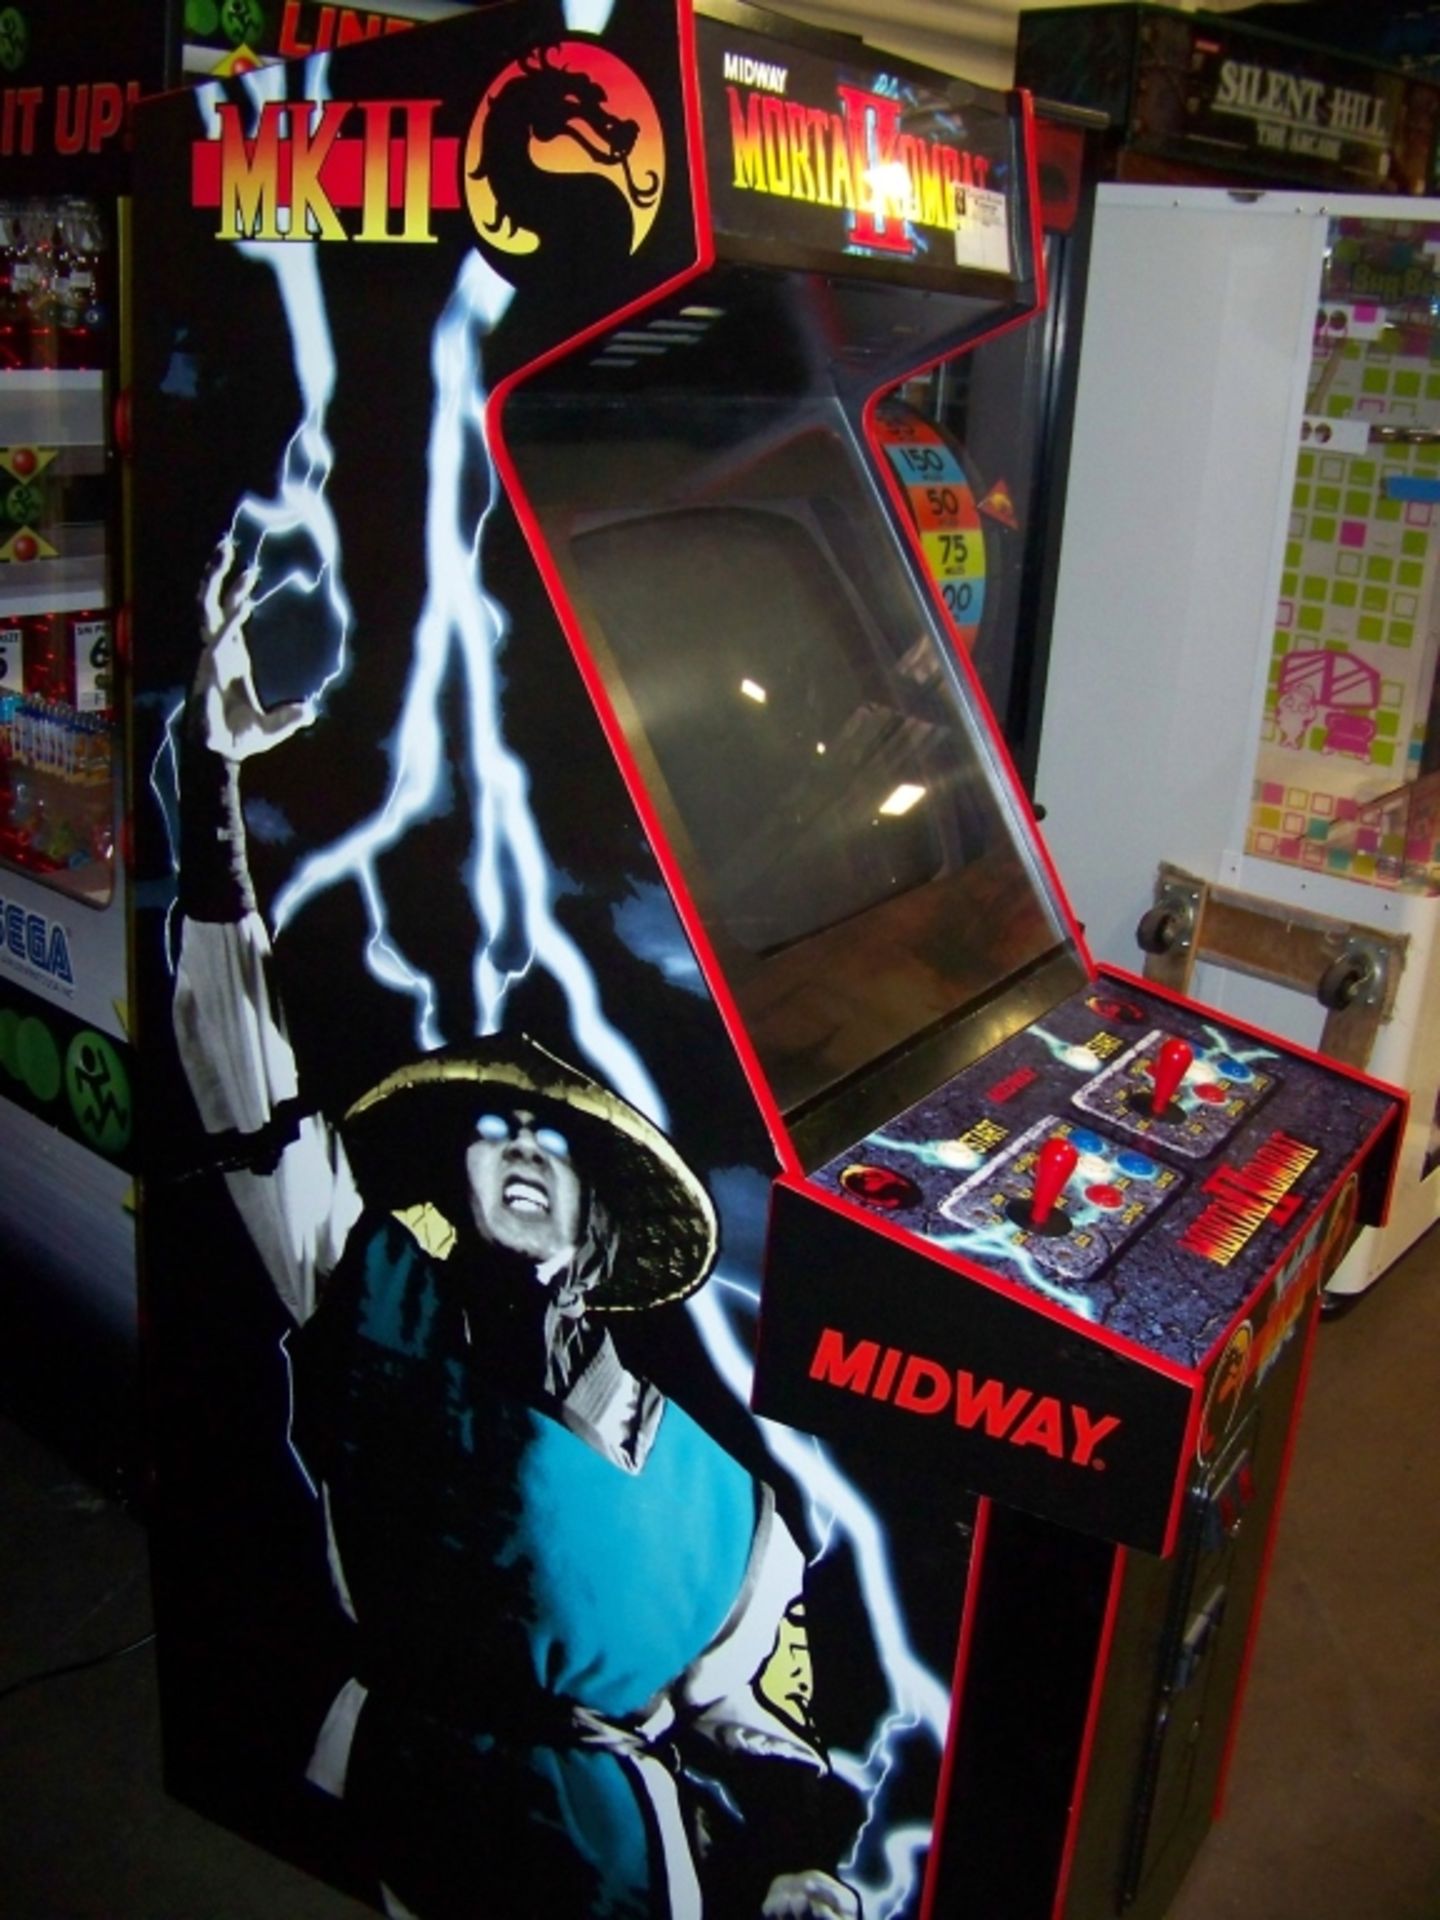 MORTAL KOMBAT II ARCADE GAME MIDWAY Item is in used condition. Evidence of wear and commercial - Image 8 of 8